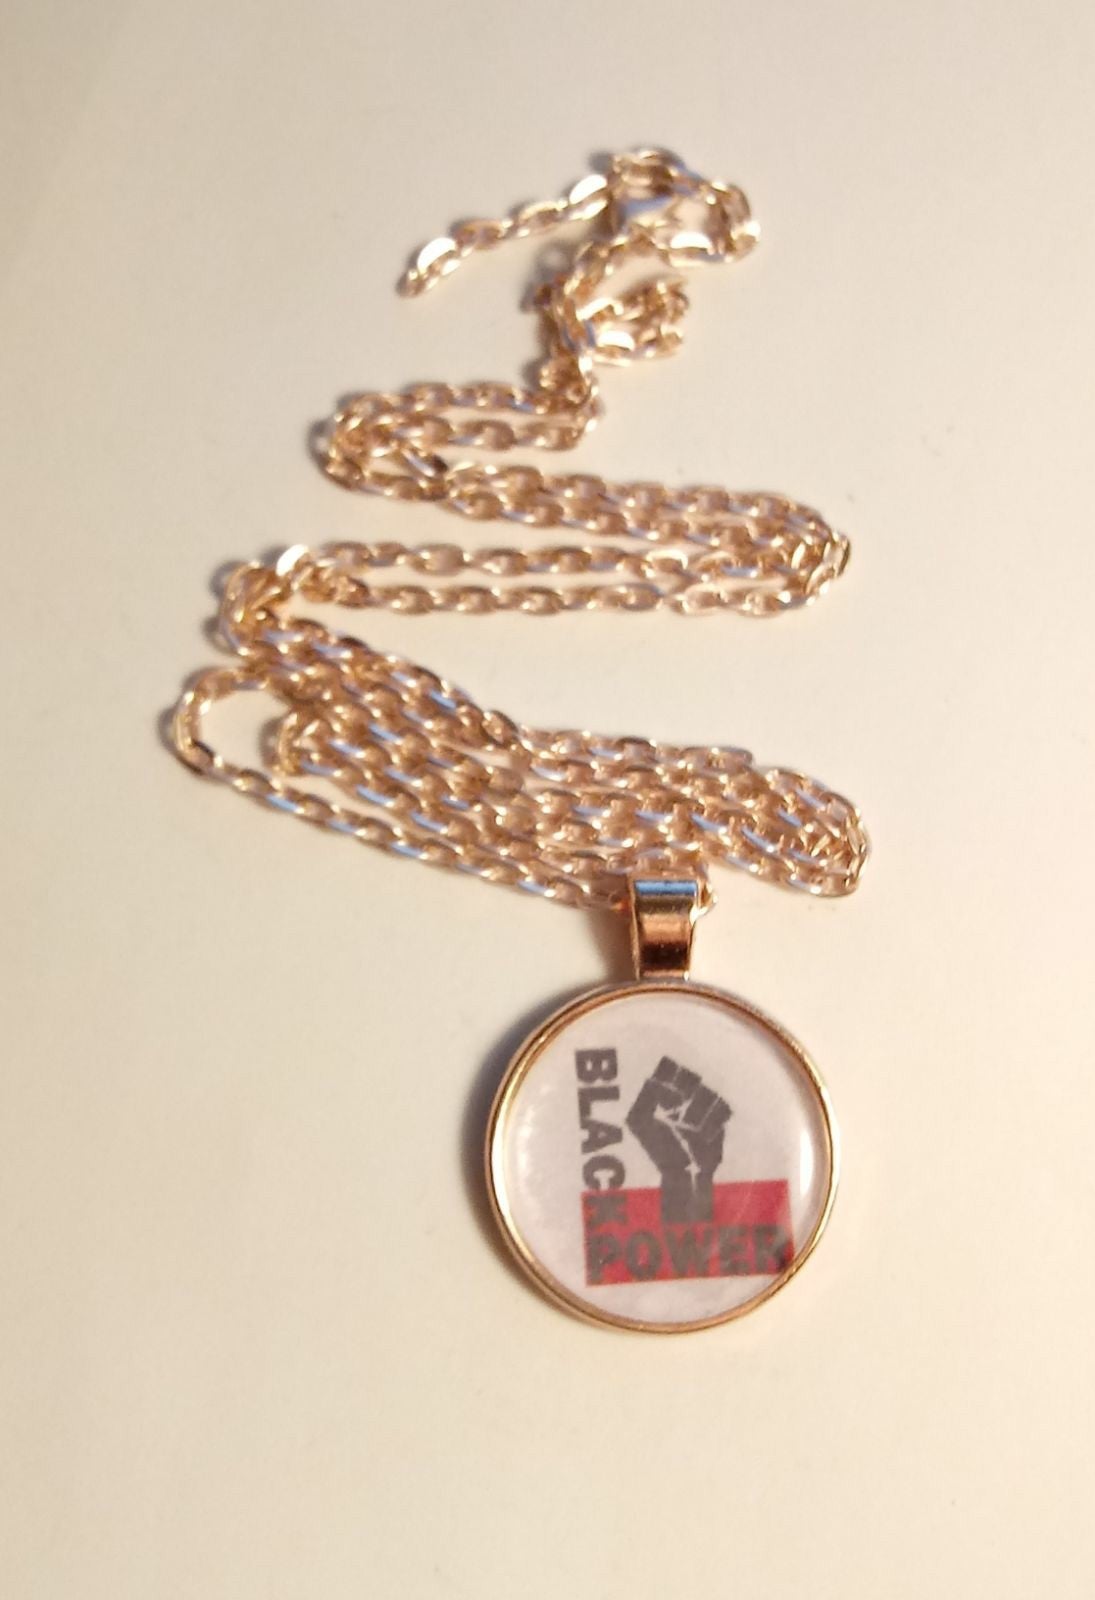 Black Power Raised Fist Peaceful Protest Necklace